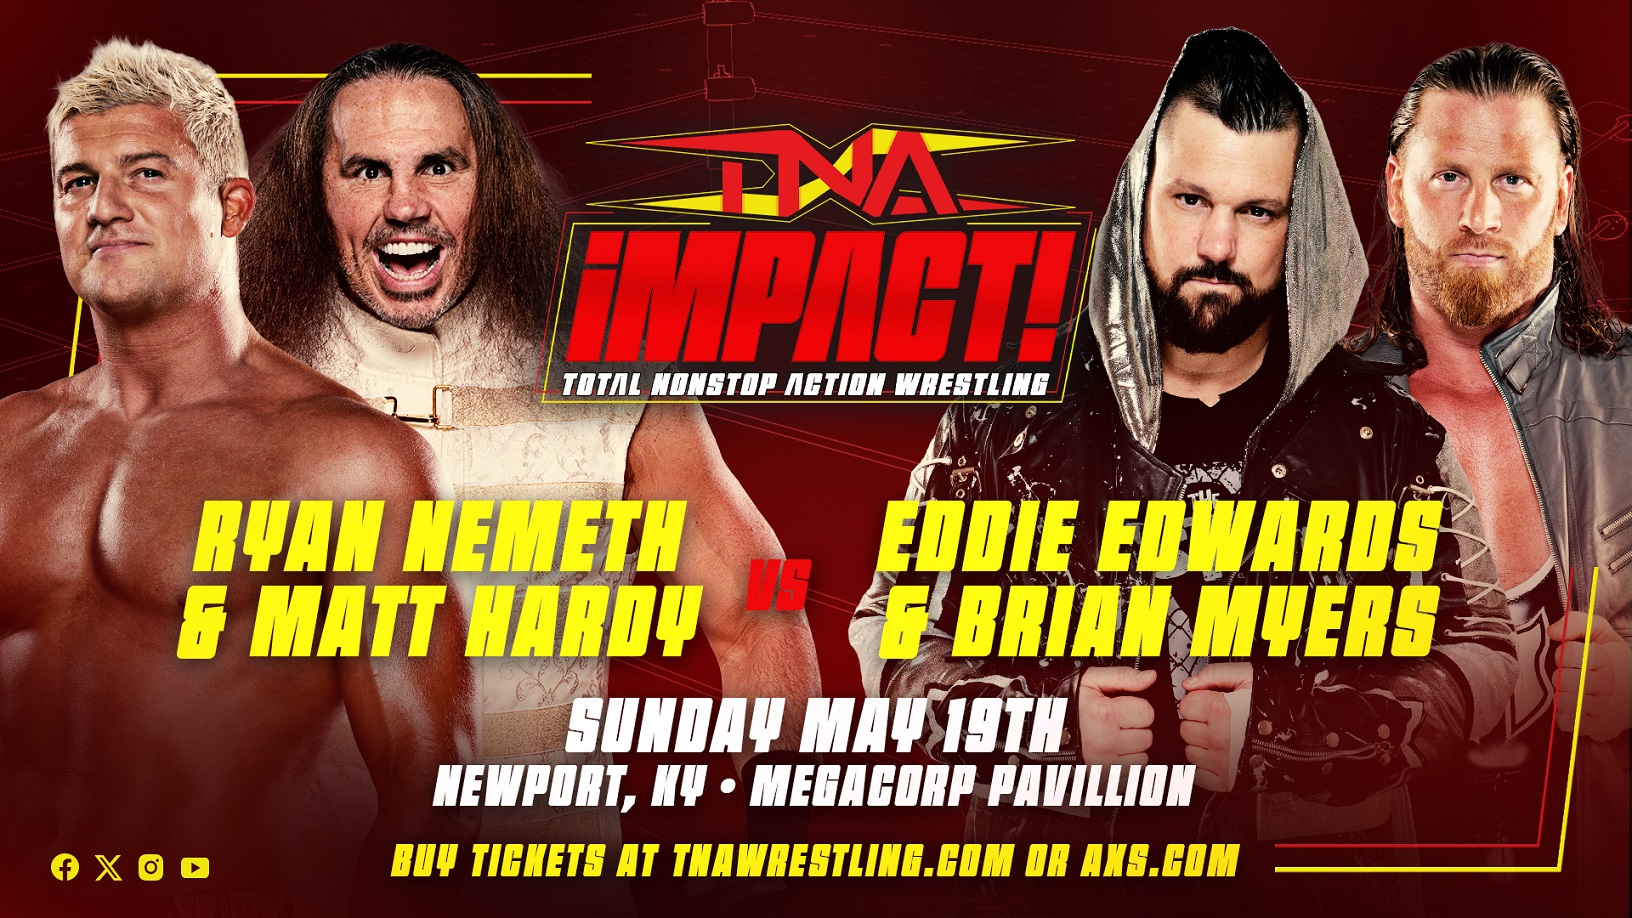 Preview the Card for TNA’s Return to the Greater Cincinnati Area on May 18 & 19 – TNA Wrestling